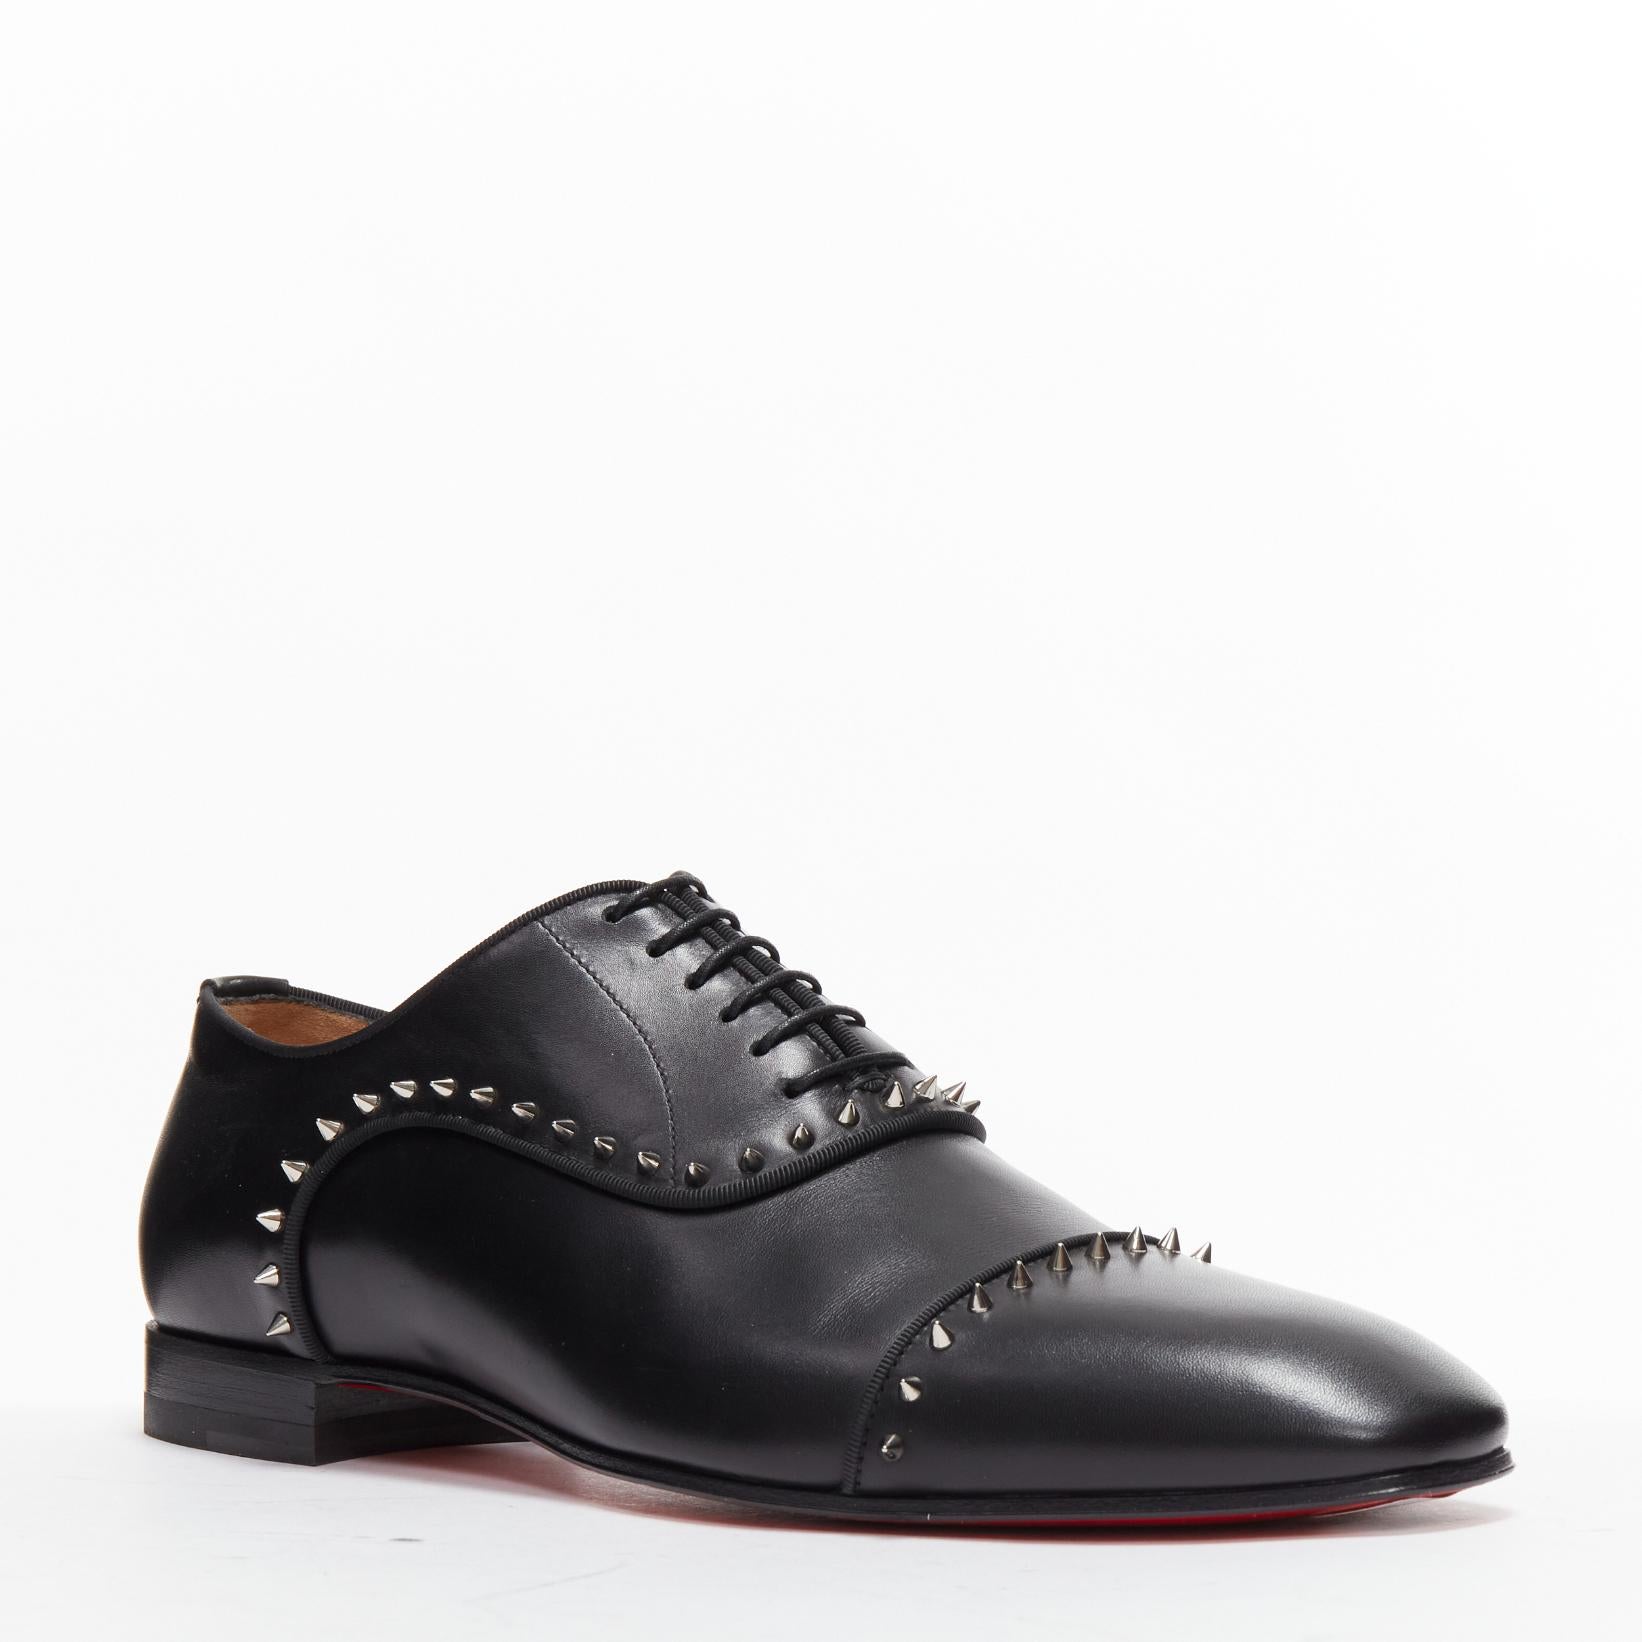 new CHRISTIAN LOUBOUTIN Eaton Flat black leather silver spikes stud brogue EU42.5
Reference: TGAS/D00368
Brand: Christian Louboutin
Model: Eaton Flat
Material: Leather
Color: Black, Silver
Pattern: Solid
Closure: Lace Up
Lining: Nude Leather
Extra